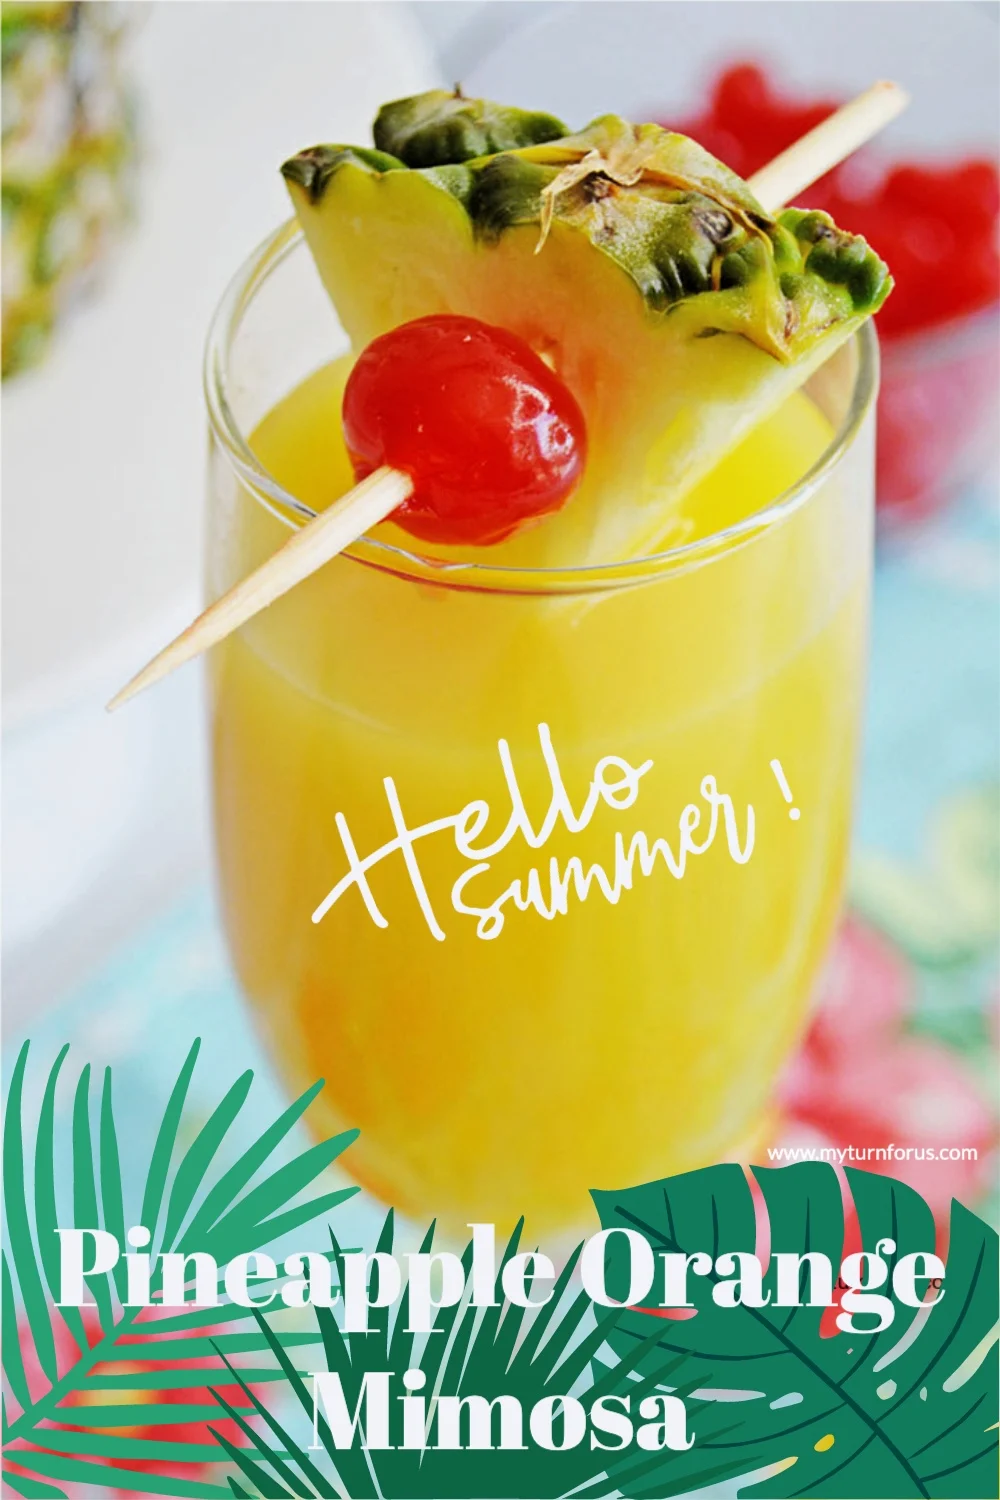 Our best mimosa recipe contains rum, pineapple, and orange juice for a Pineapple Mimosa or Pineapple Orange Mimosa or Pineapple Drinks.